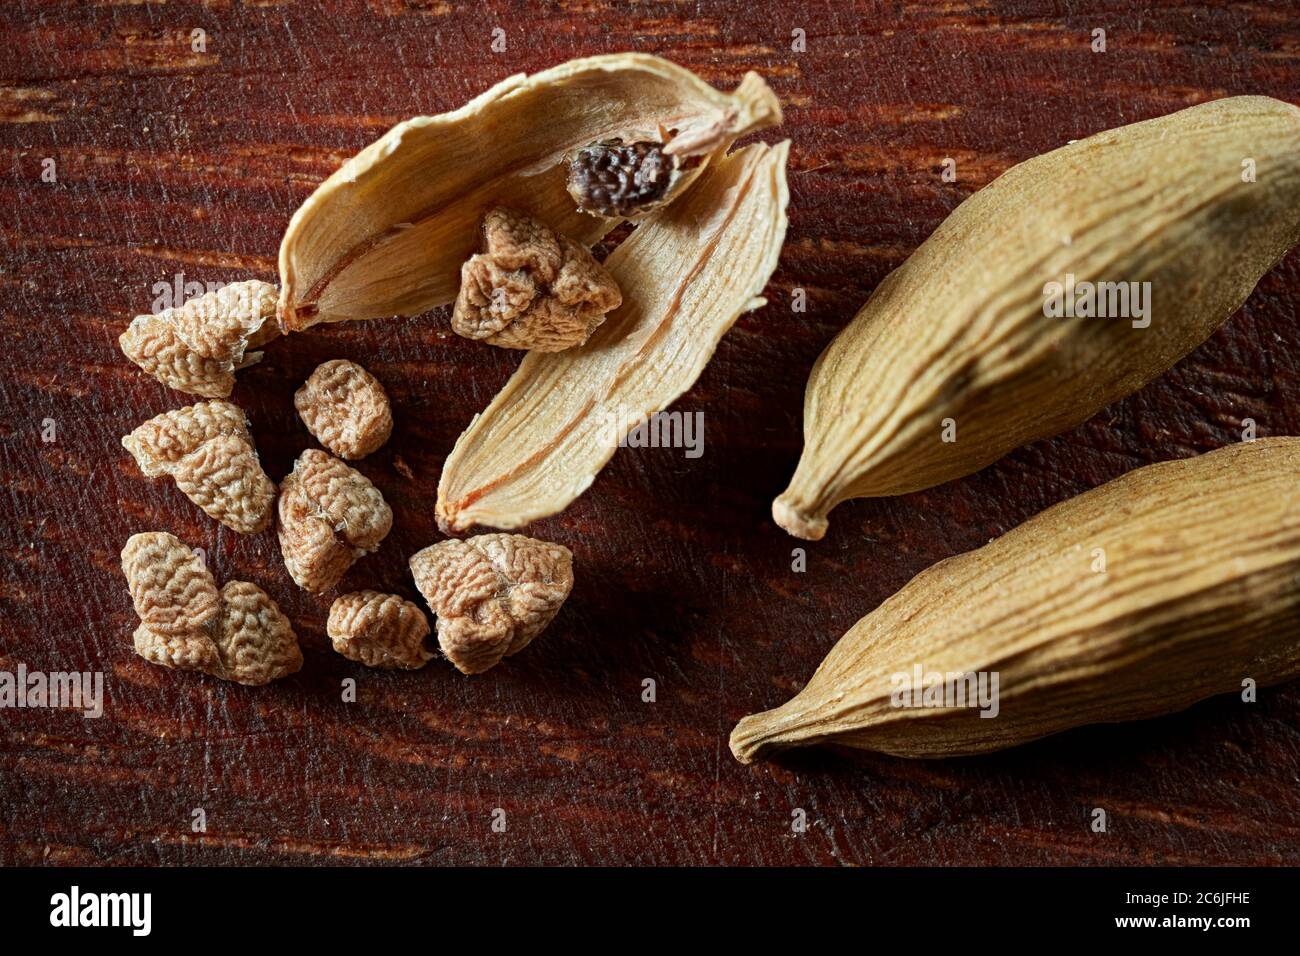 Close up of dried cardamom pods and seeds on wooden board. Stock Photo